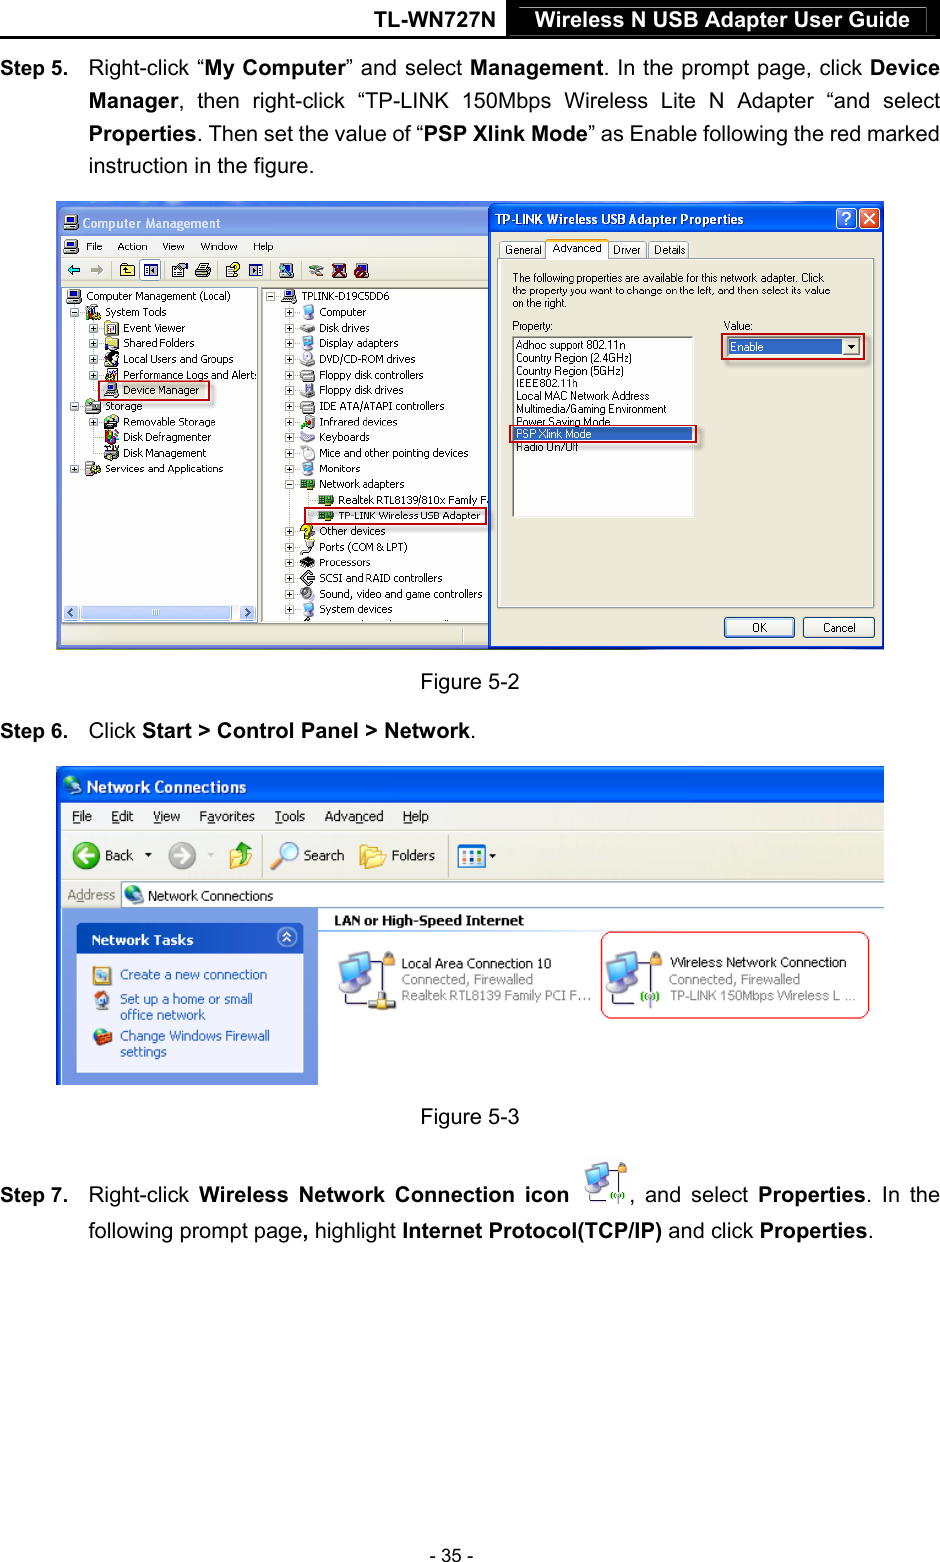 TL-WN727N Wireless N USB Adapter User Guide  - 35 - Step 5.  Right-click “My Computer” and select Management. In the prompt page, click Device Manager, then right-click “TP-LINK 150Mbps Wireless Lite N Adapter “and select Properties. Then set the value of “PSP Xlink Mode” as Enable following the red marked instruction in the figure.  Figure 5-2 Step 6.  Click Start &gt; Control Panel &gt; Network.  Figure 5-3 Step 7.  Right-click  Wireless Network Connection icon  , and select Properties. In the following prompt page, highlight Internet Protocol(TCP/IP) and click Properties. 